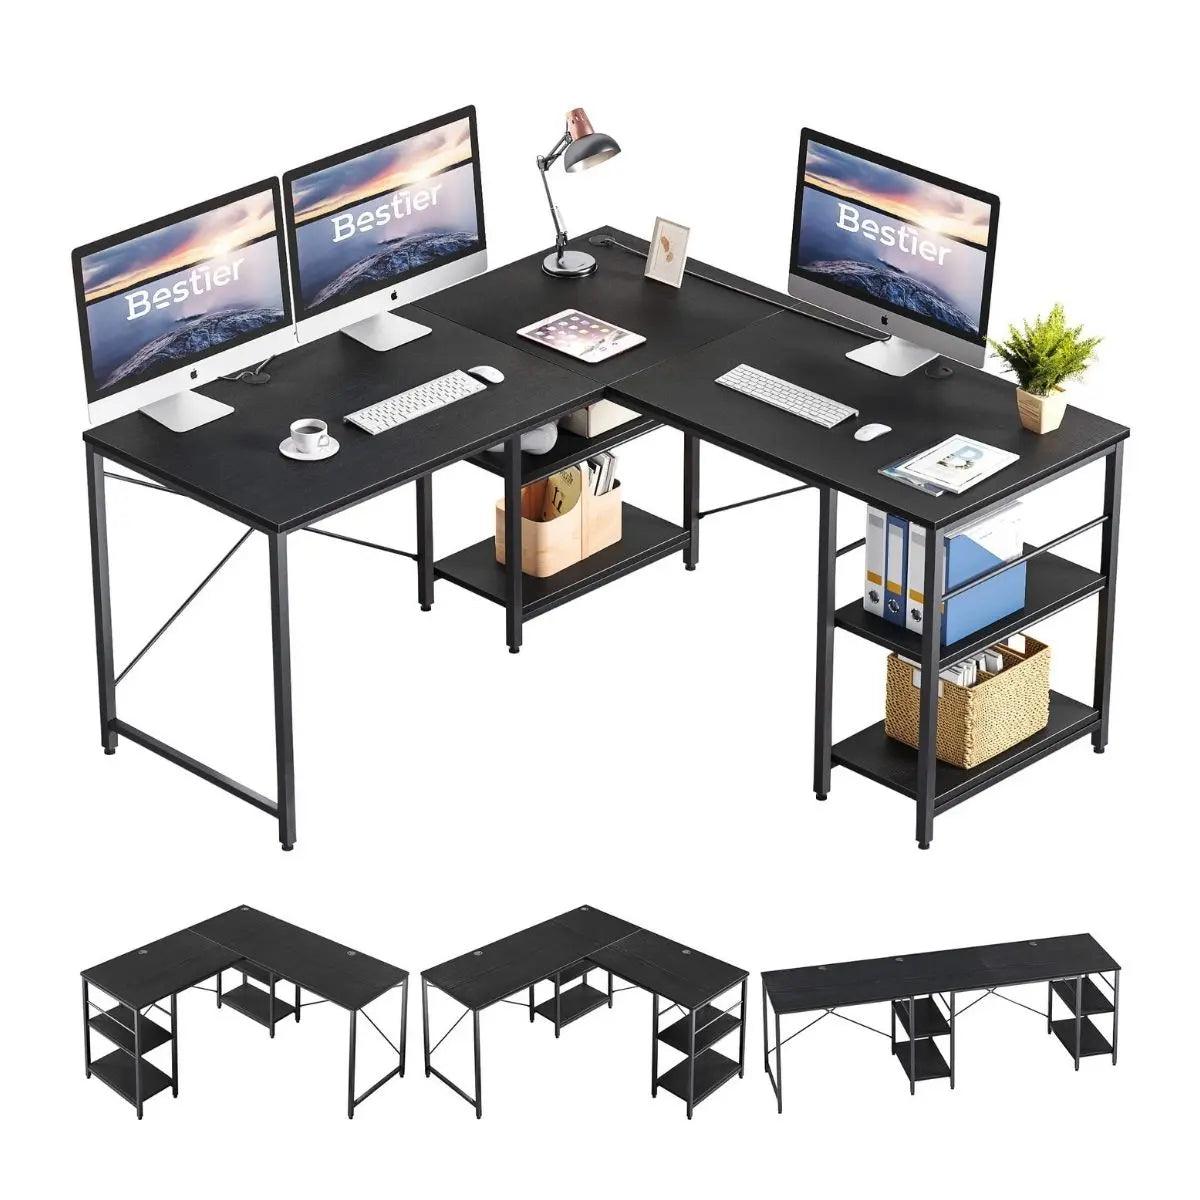 95.2 Inch Two Person L Shaped Reversible Computer Desk of black